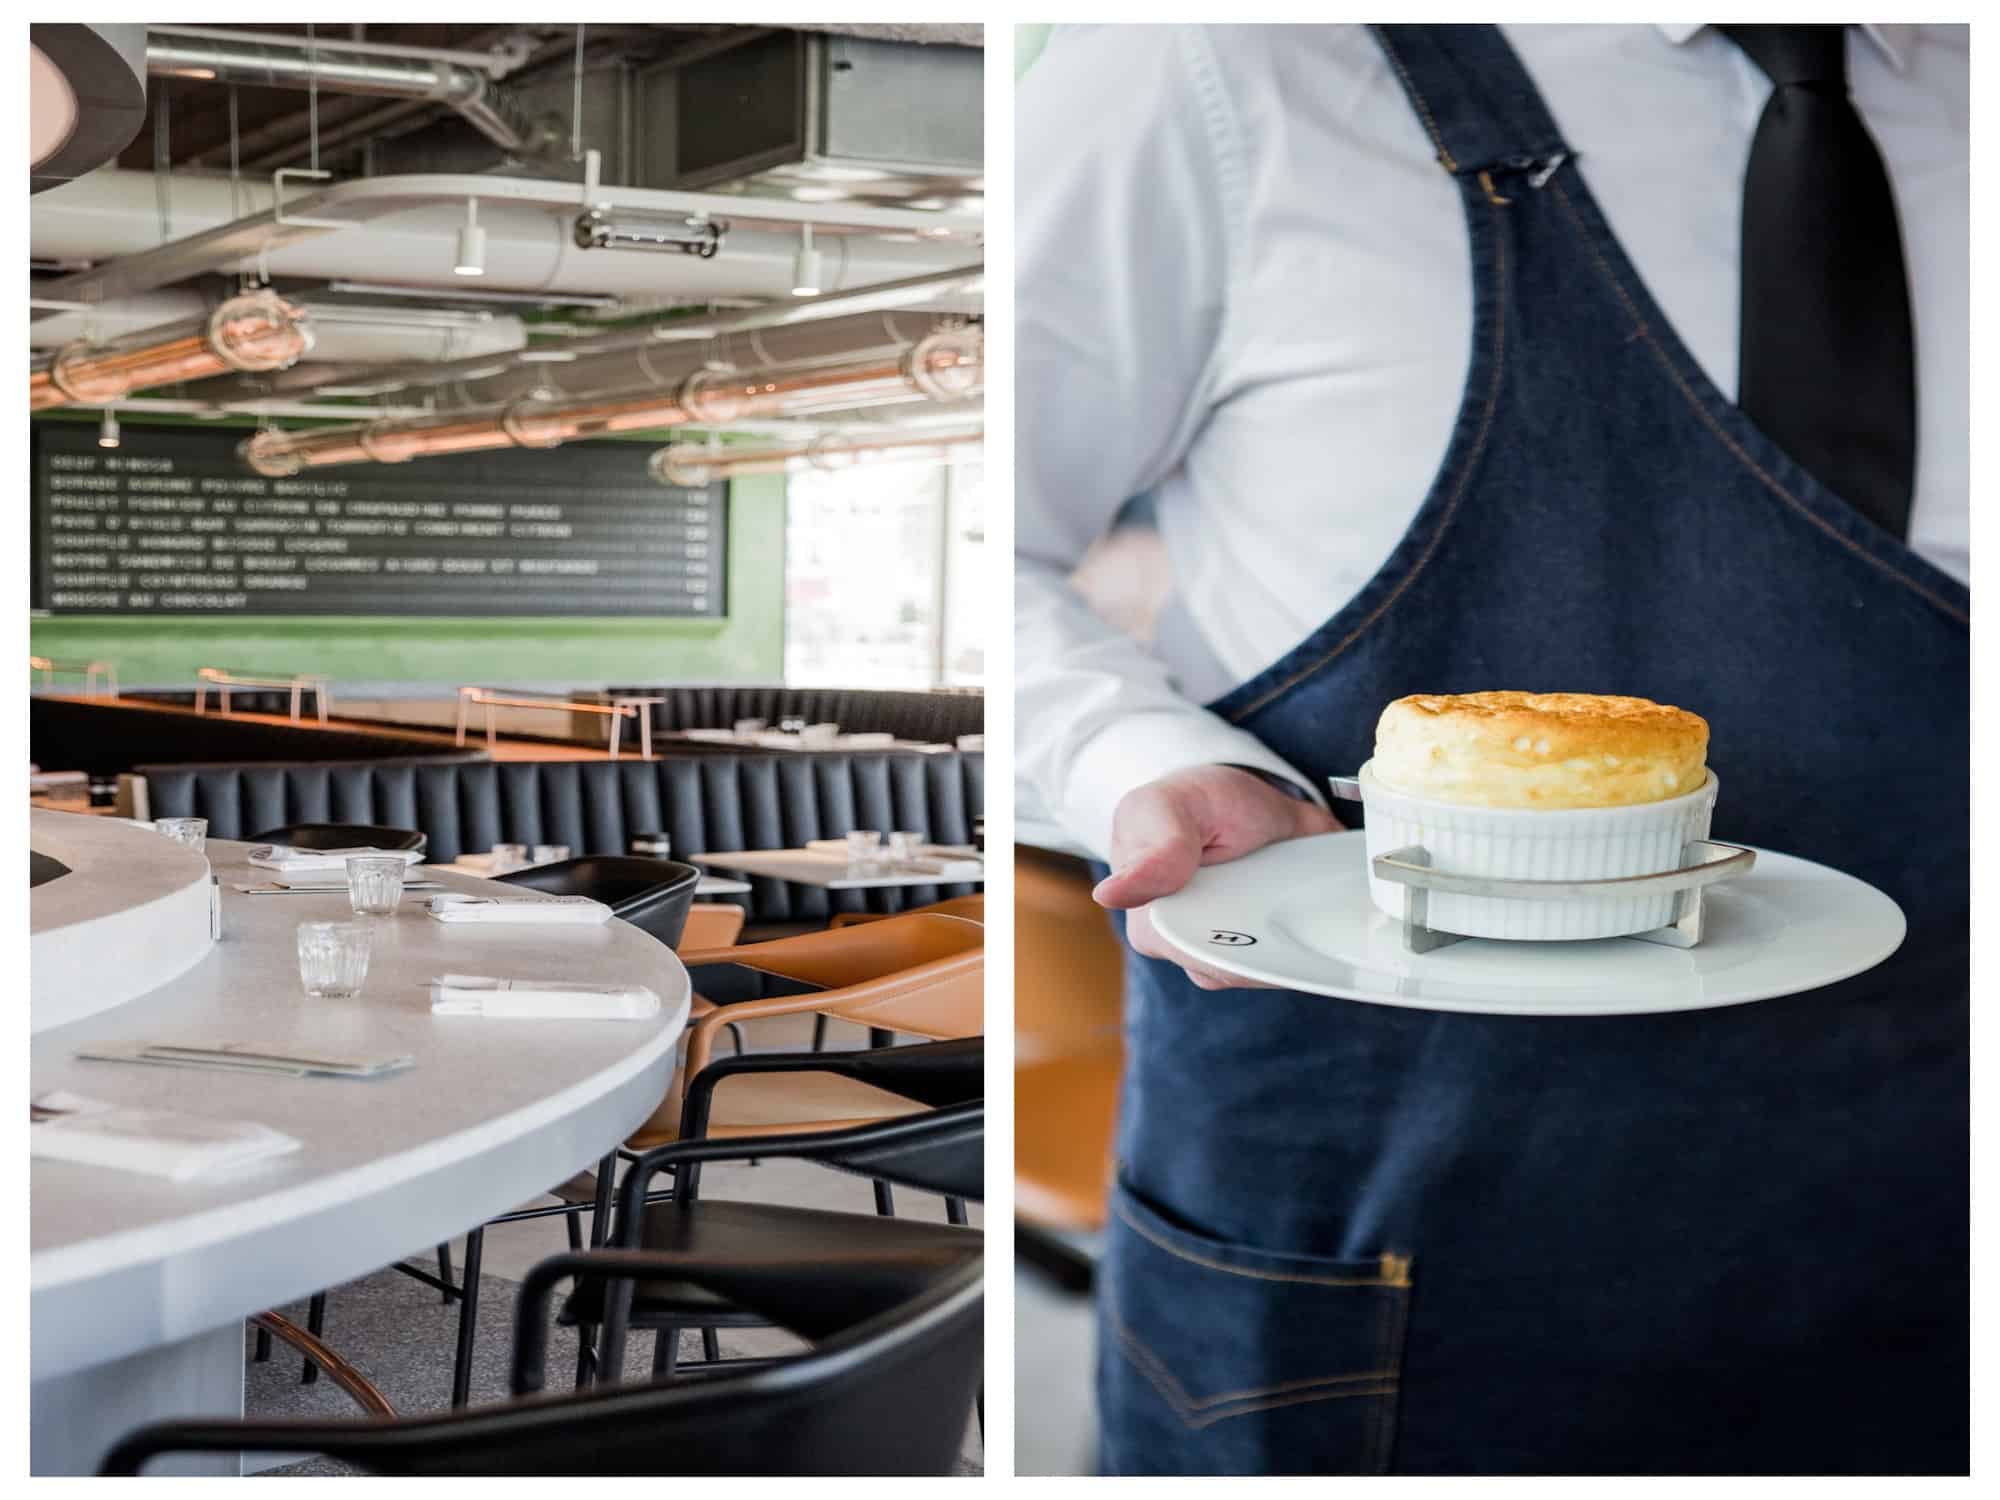 Alain Ducasse's Champeaux restaurant in Chatelet is one of the best places to eat souffle in Paris (right) and has contemporary diner-style interiors (left).